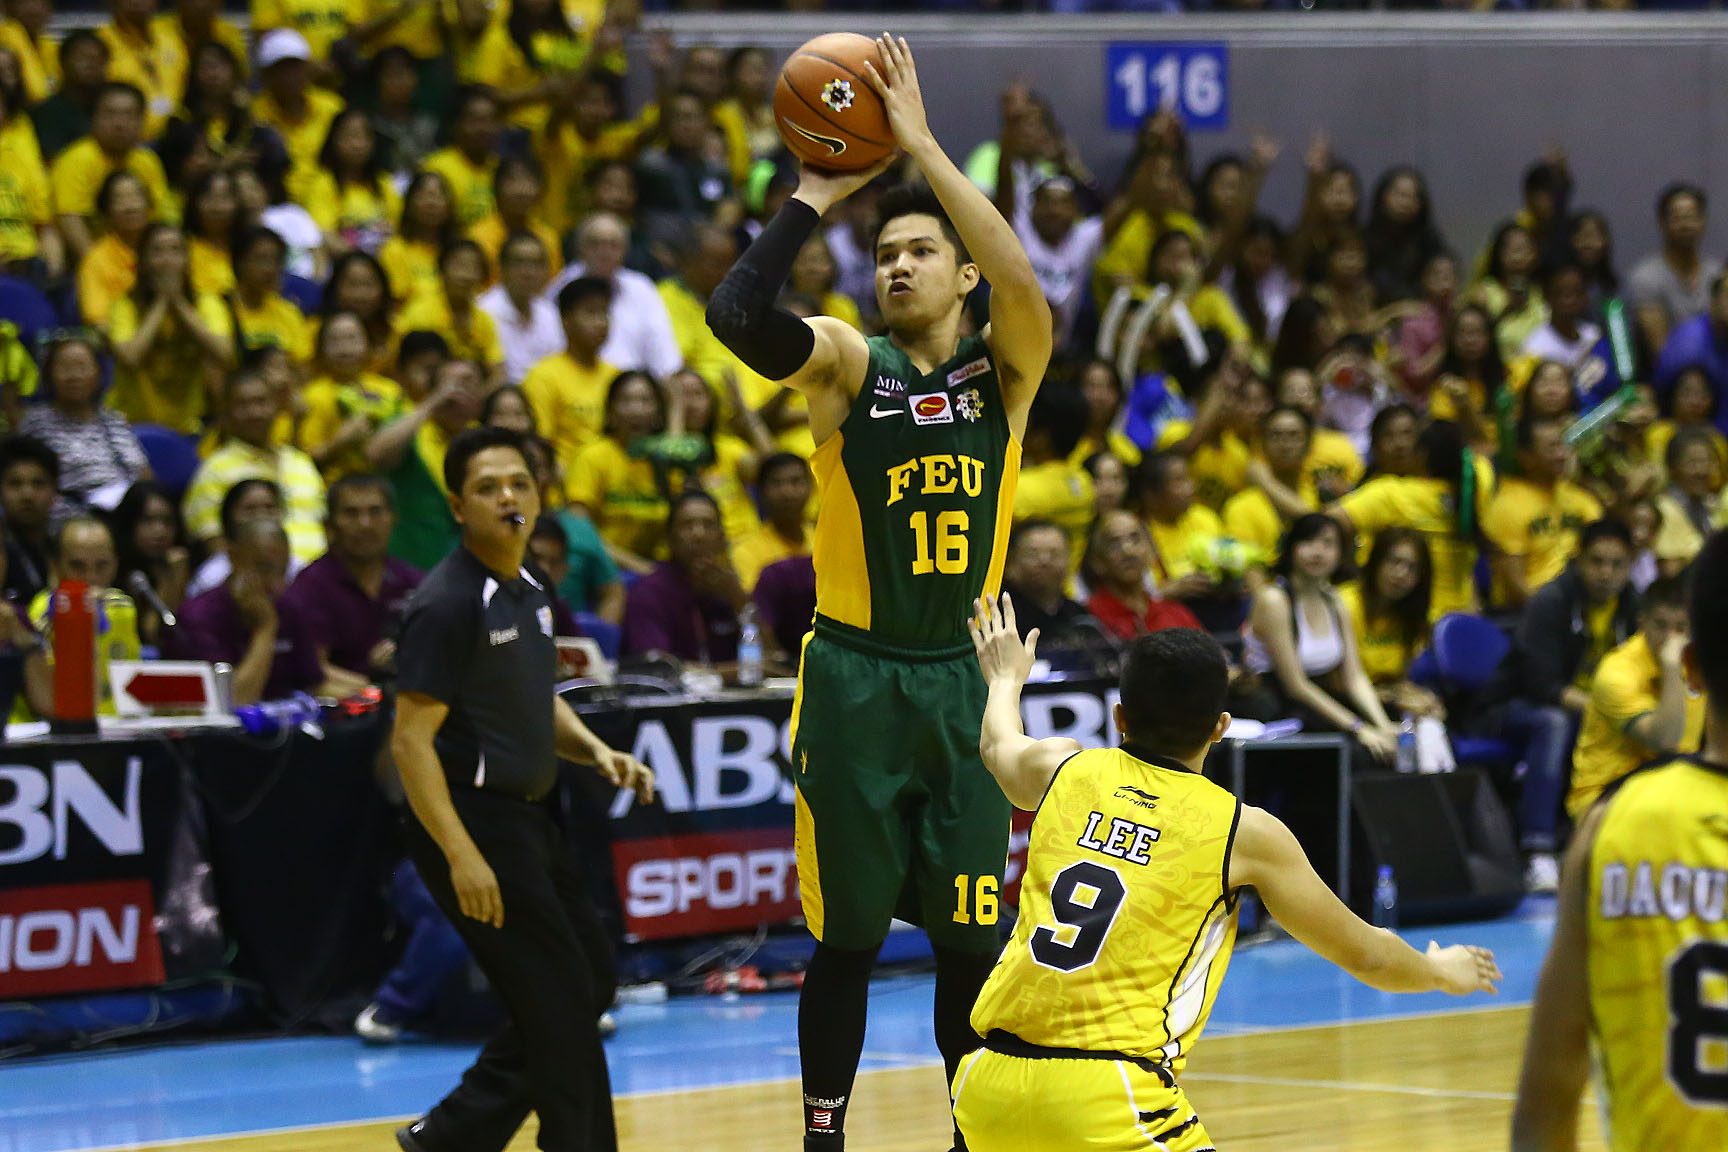 CRAMPS. FEU gunner Roger Pogoy cramped up towards the end of the game but still had 12 points and 6 rebonds. Photo by Josh Albelda / Rappler 